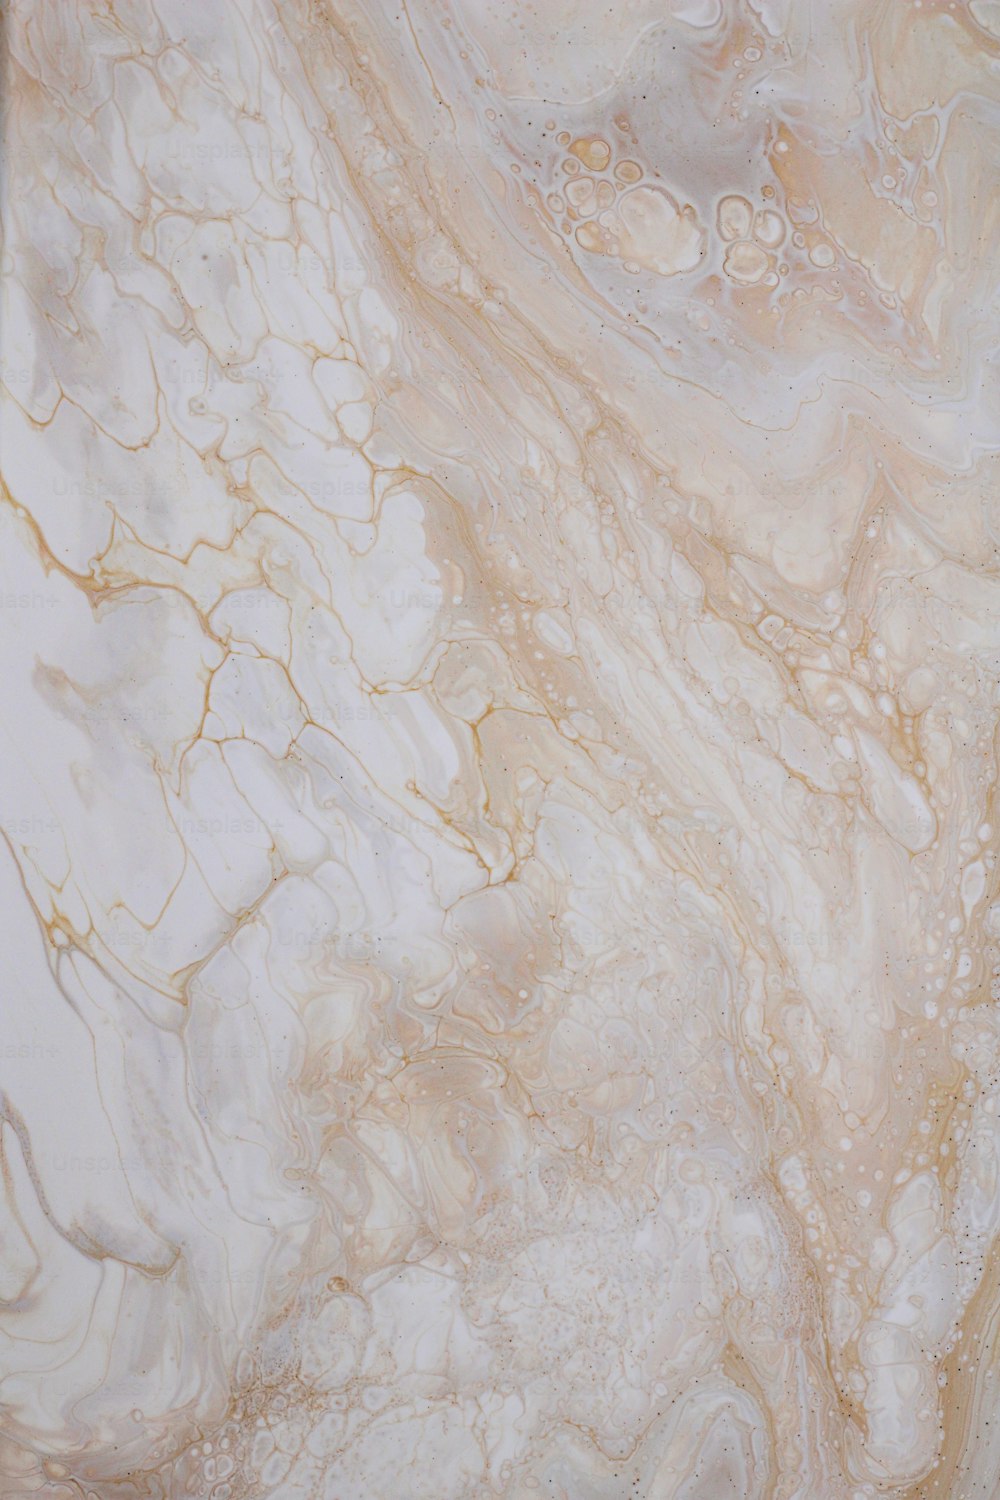 a white and gold marble counter top